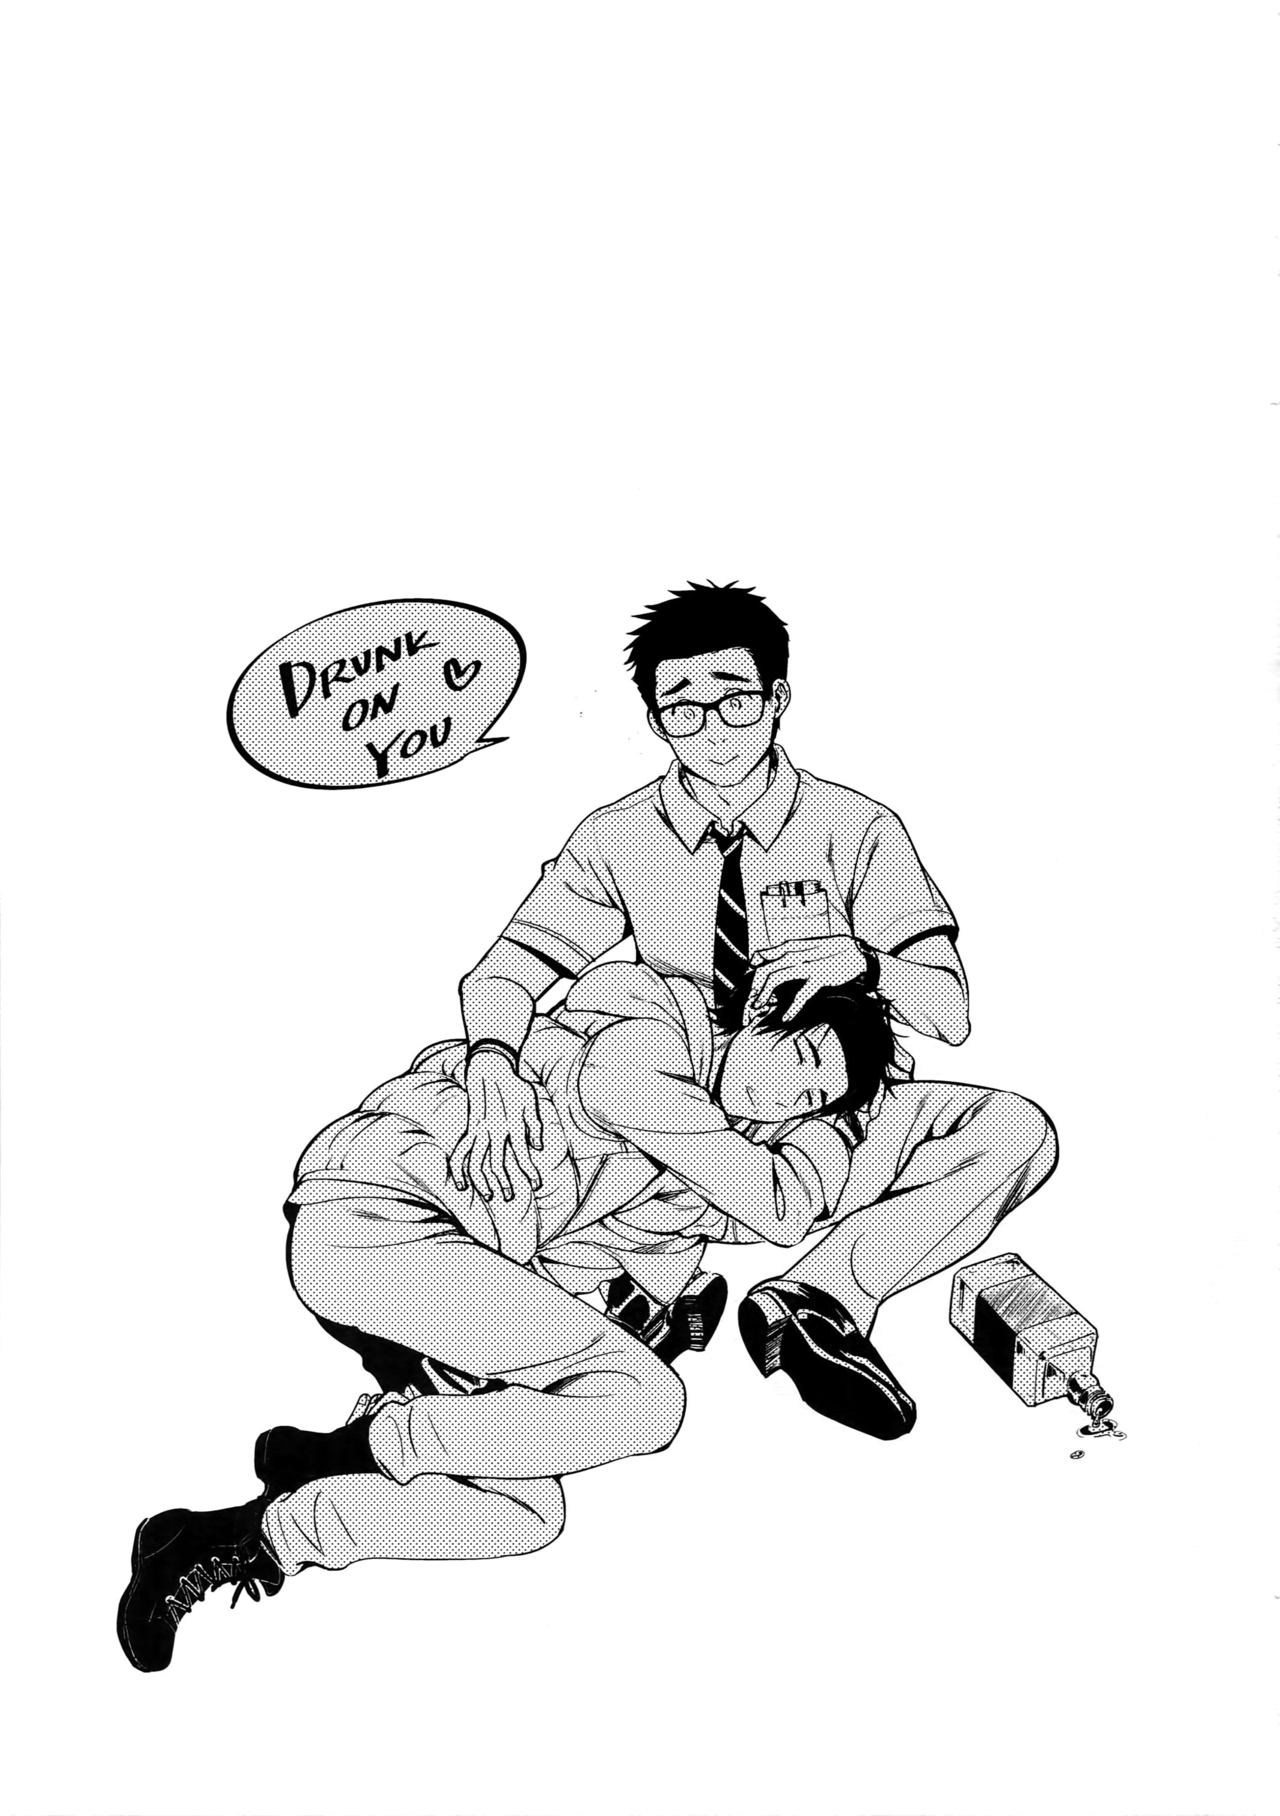 (UNLIMITED EX 3) [いぬふろ] DRUNK ON YOU (Dead by Daylight)